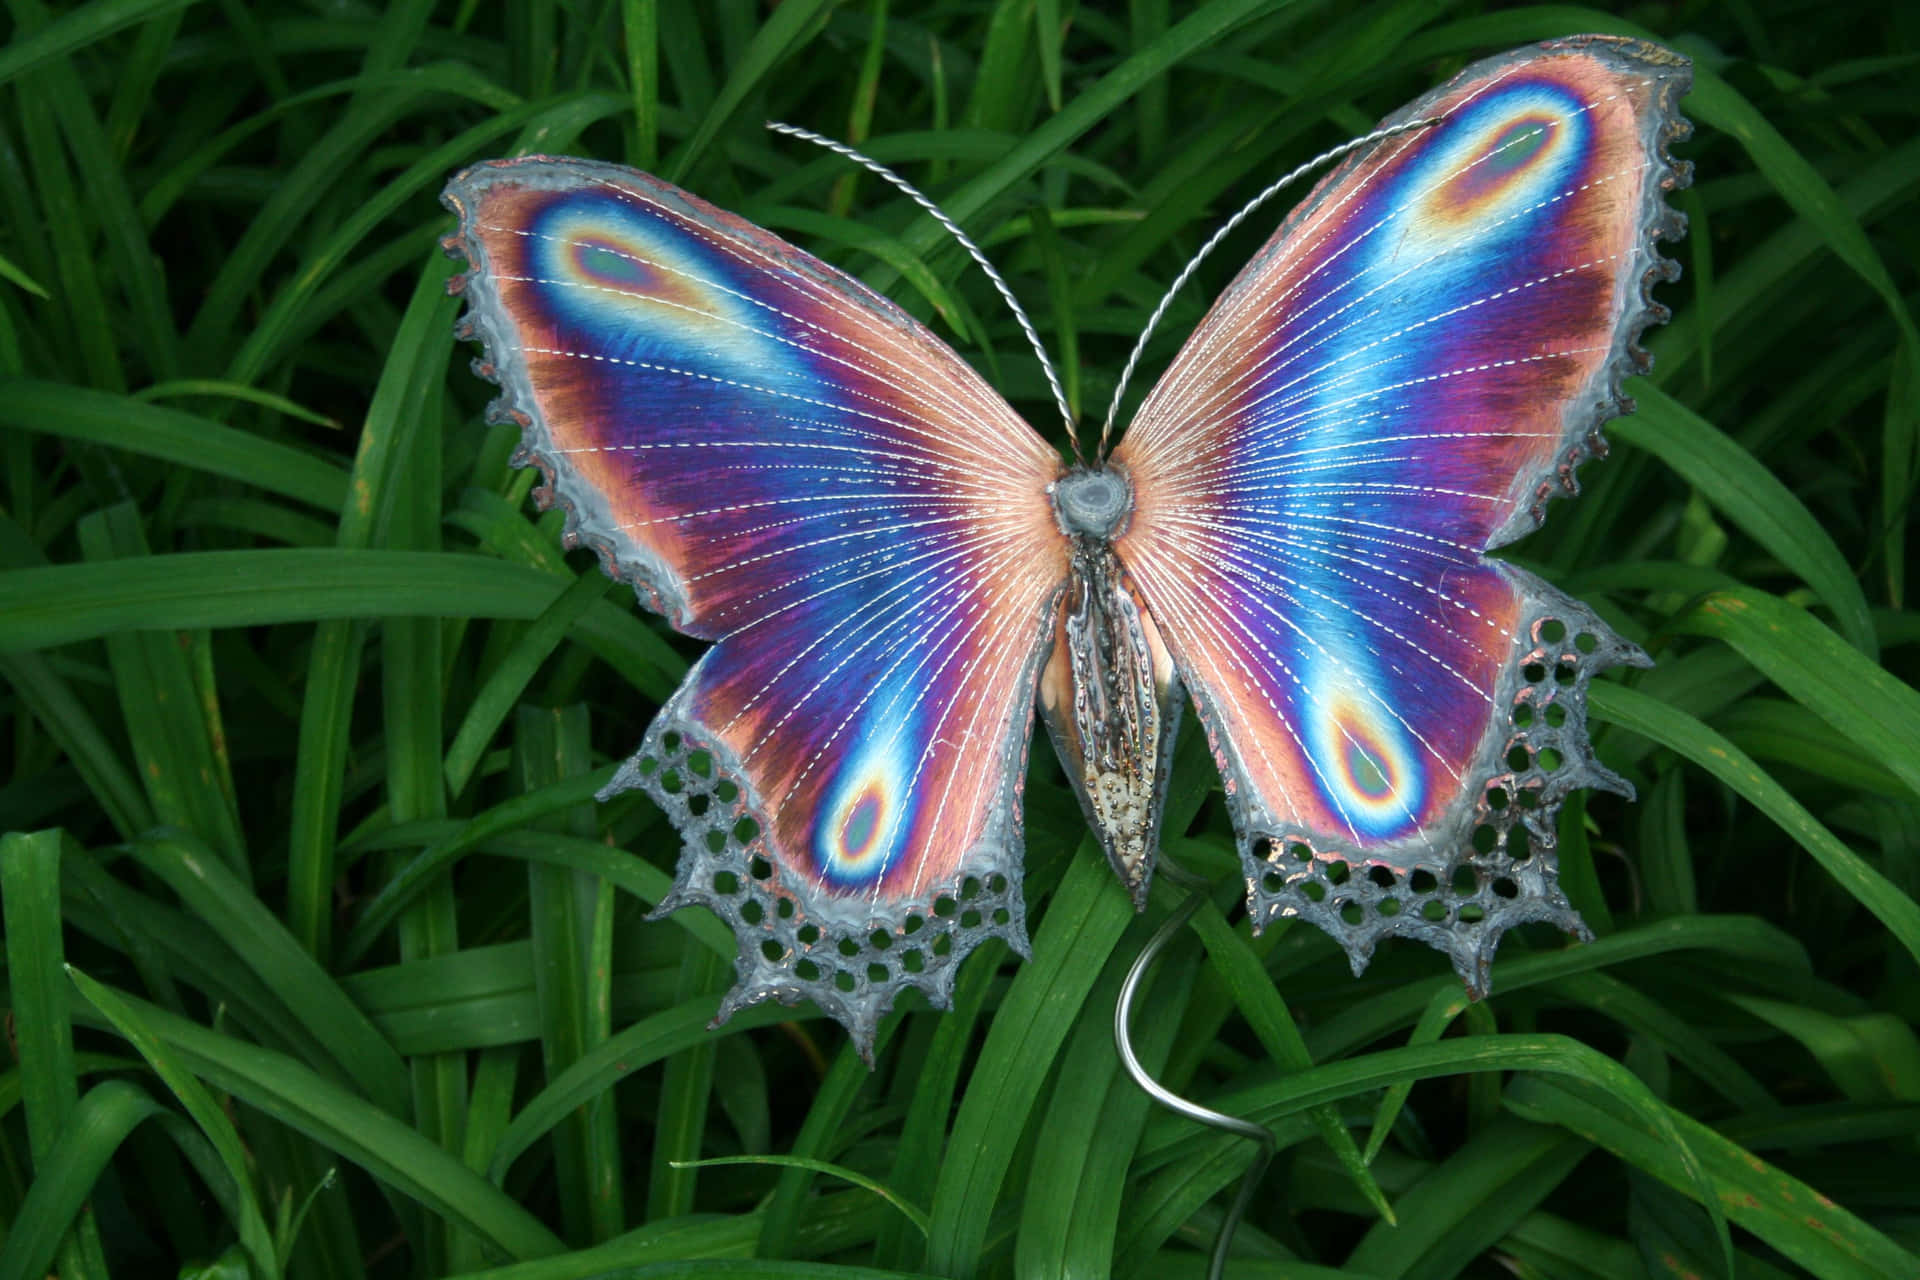 A colorful and beautiful butterfly fluttering by